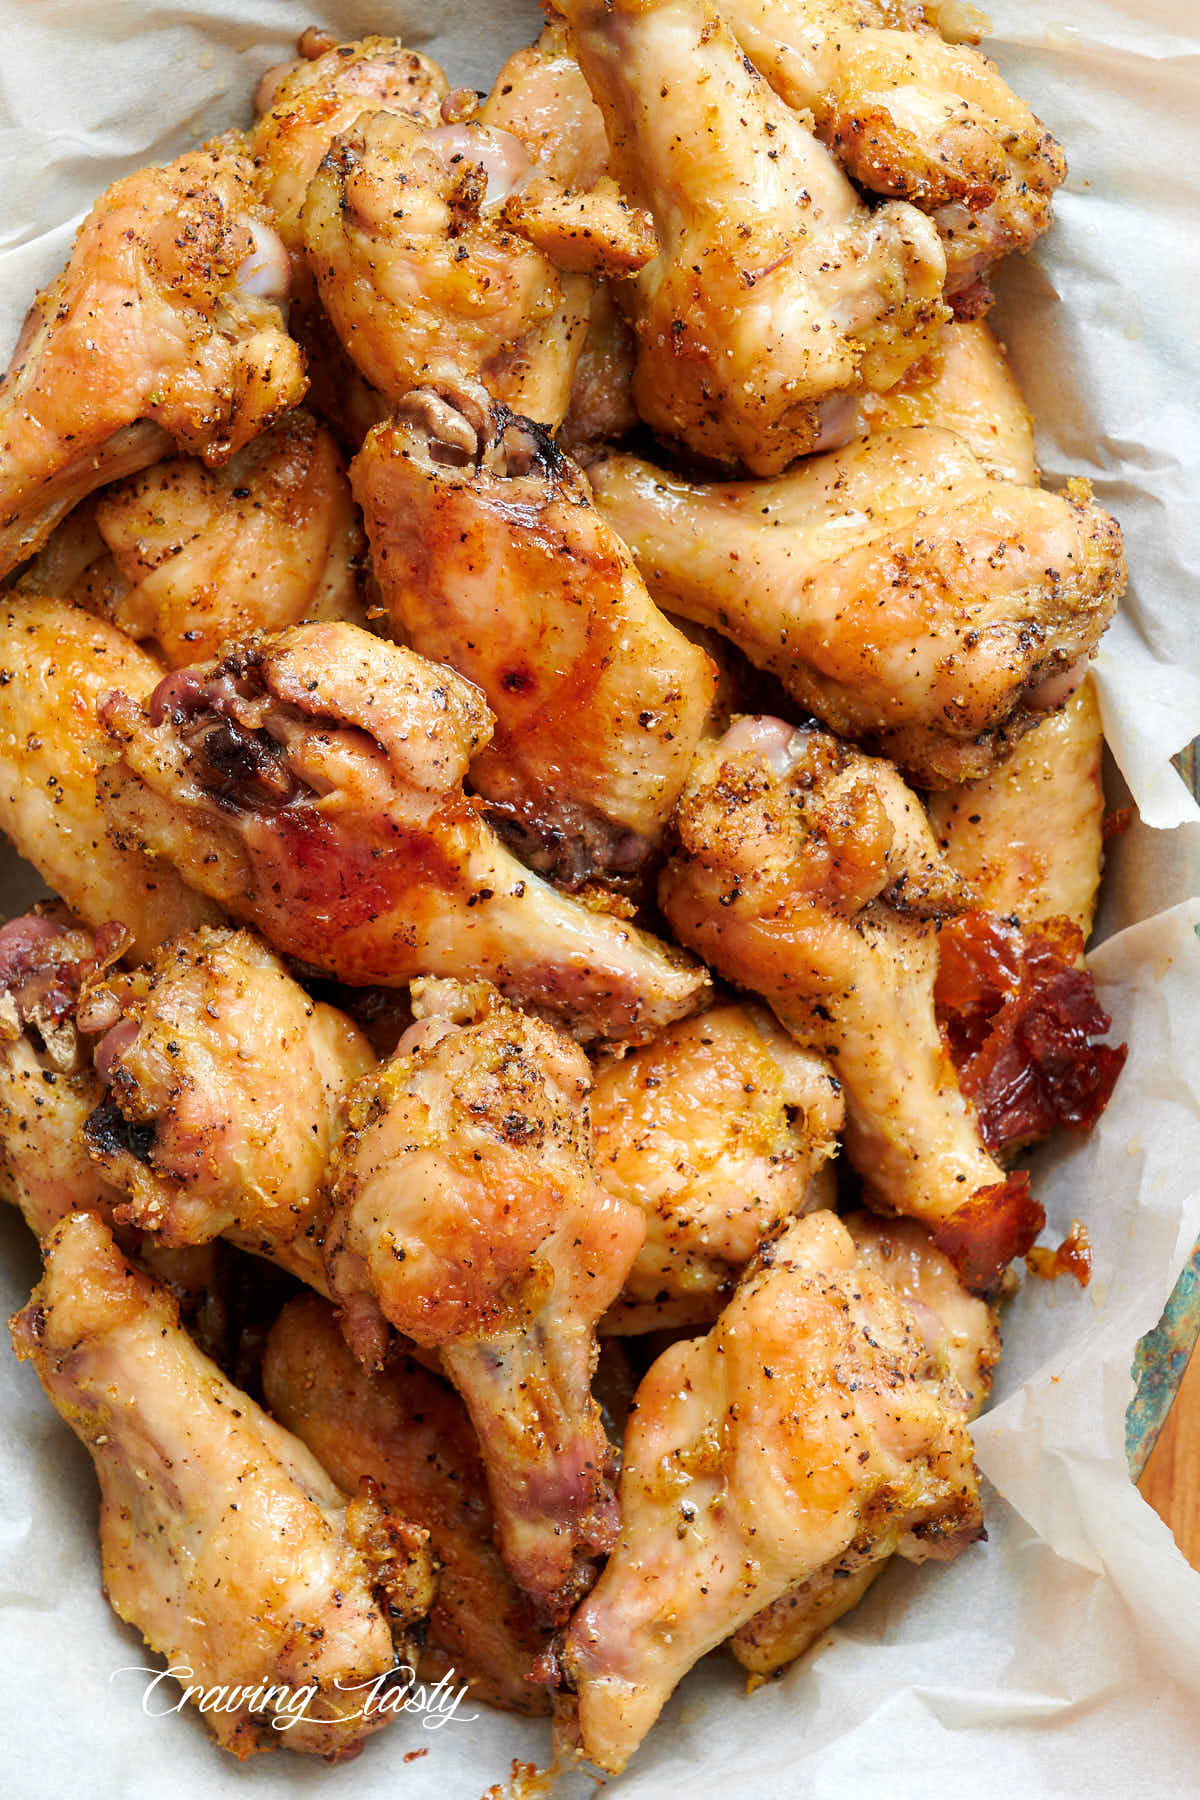 Chicken wings, seasoned with lemon and pepper, in a basket lined with wax paper